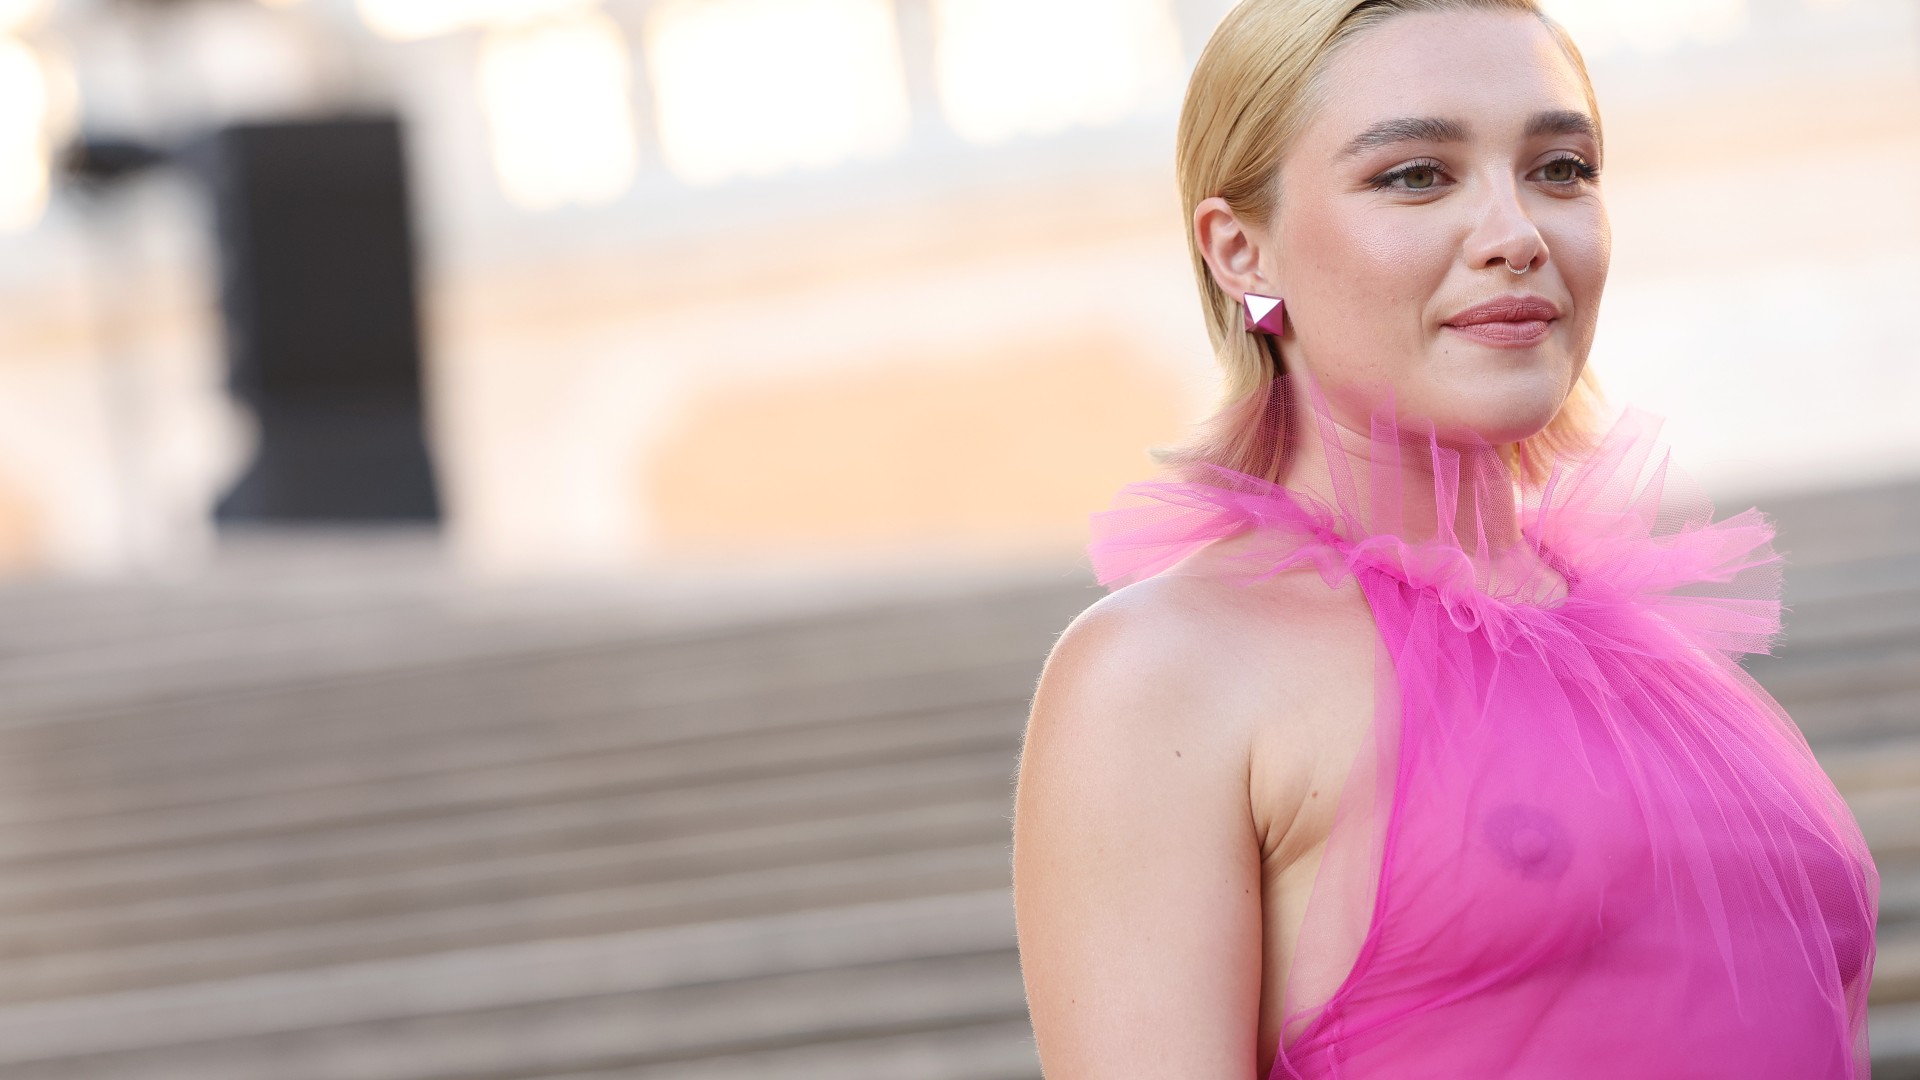 Florence Pugh 2018 Wallpapers